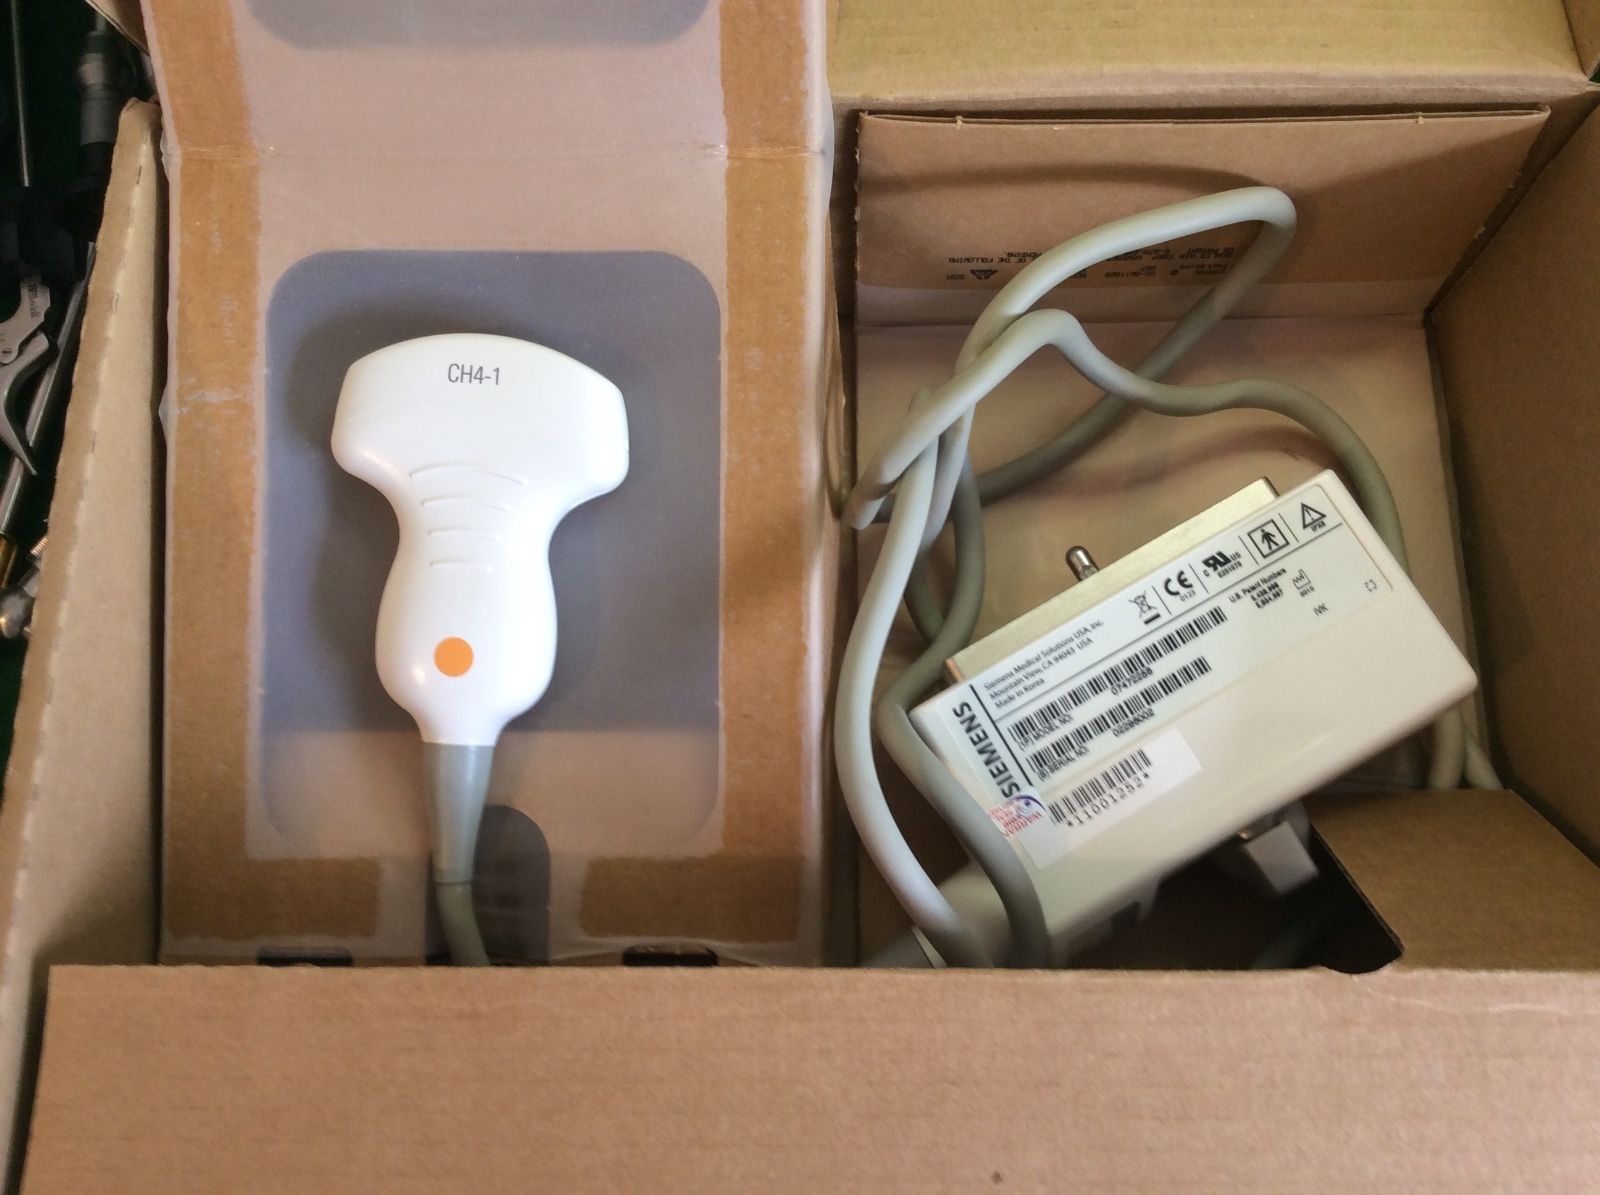 Siemens Antares CF-2 Ultrasound Transducer Probe - 2D Linear 3-7Mhz 07472256 NEW DIAGNOSTIC ULTRASOUND MACHINES FOR SALE